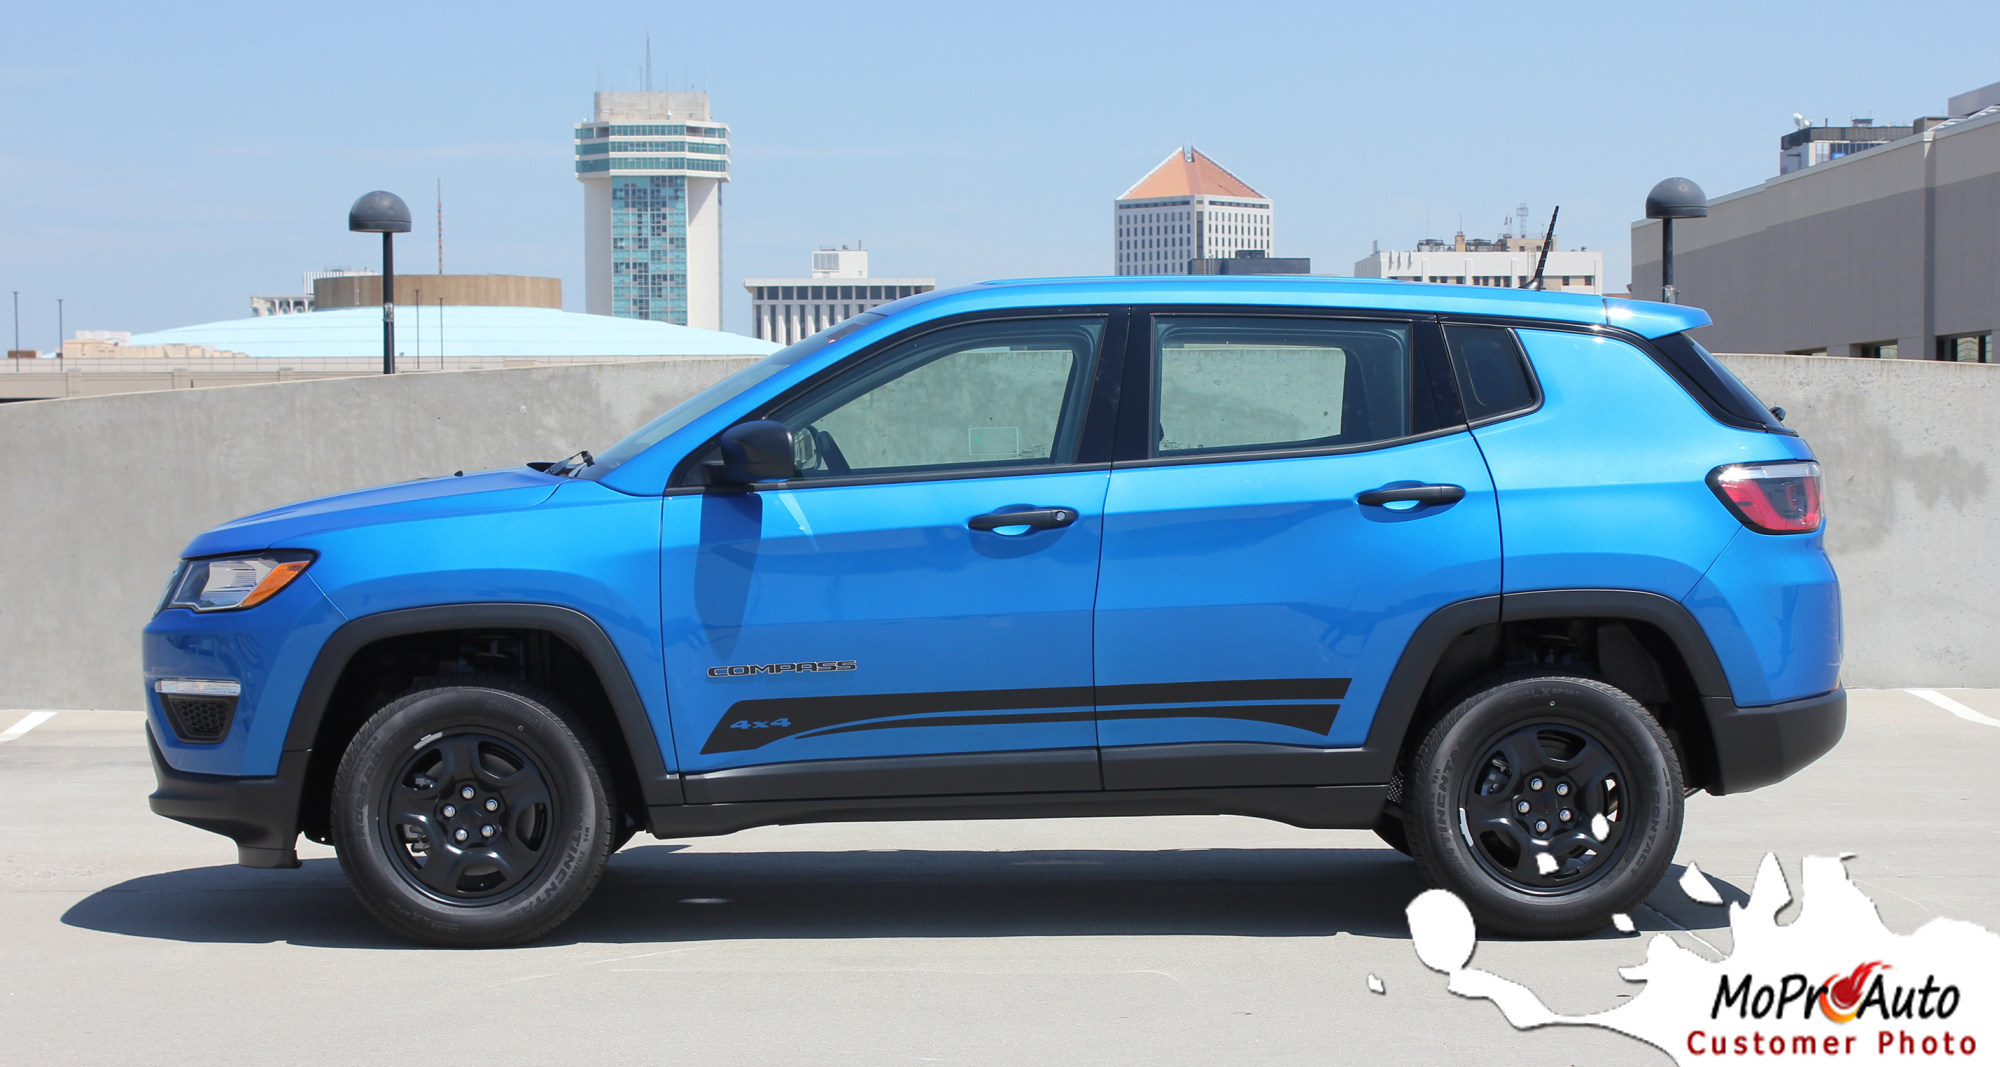 2017, 2018, 2019, 2020, 2021, 2022, 2023 Jeep Compass Vinyl Graphics Decals Stripes | Customer Photo Course